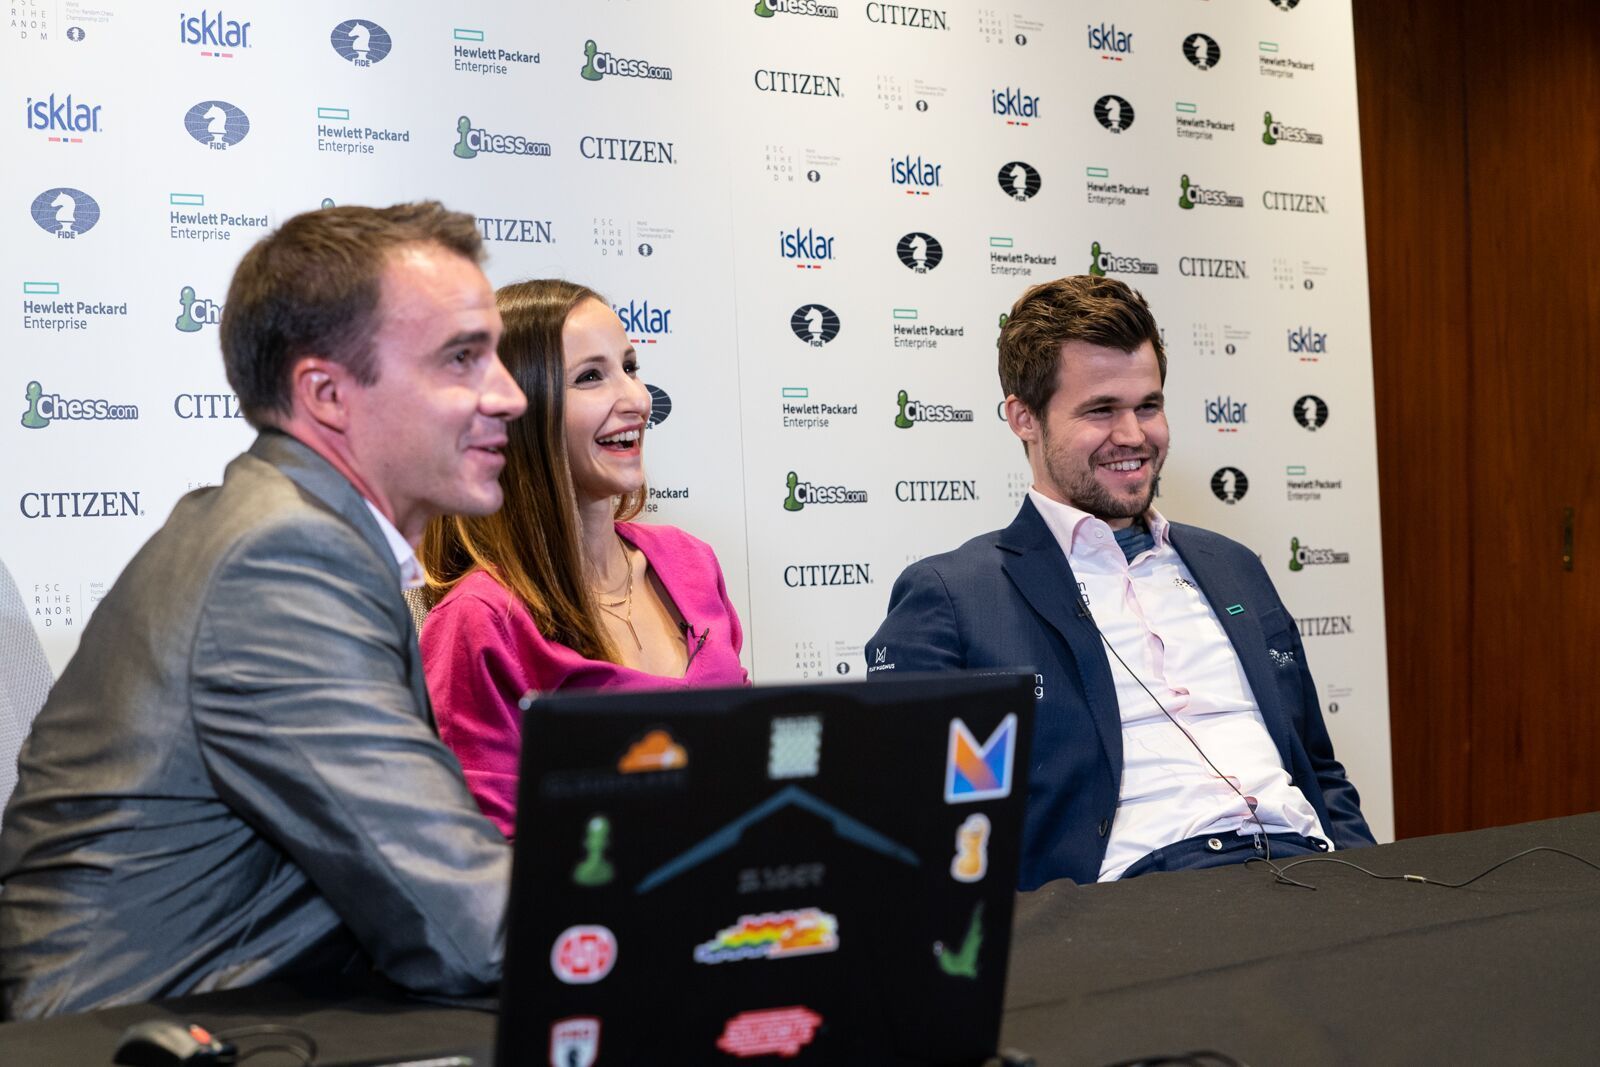 Carlsen joins the Chess.com commentary team on day three after advancing to the championship final.